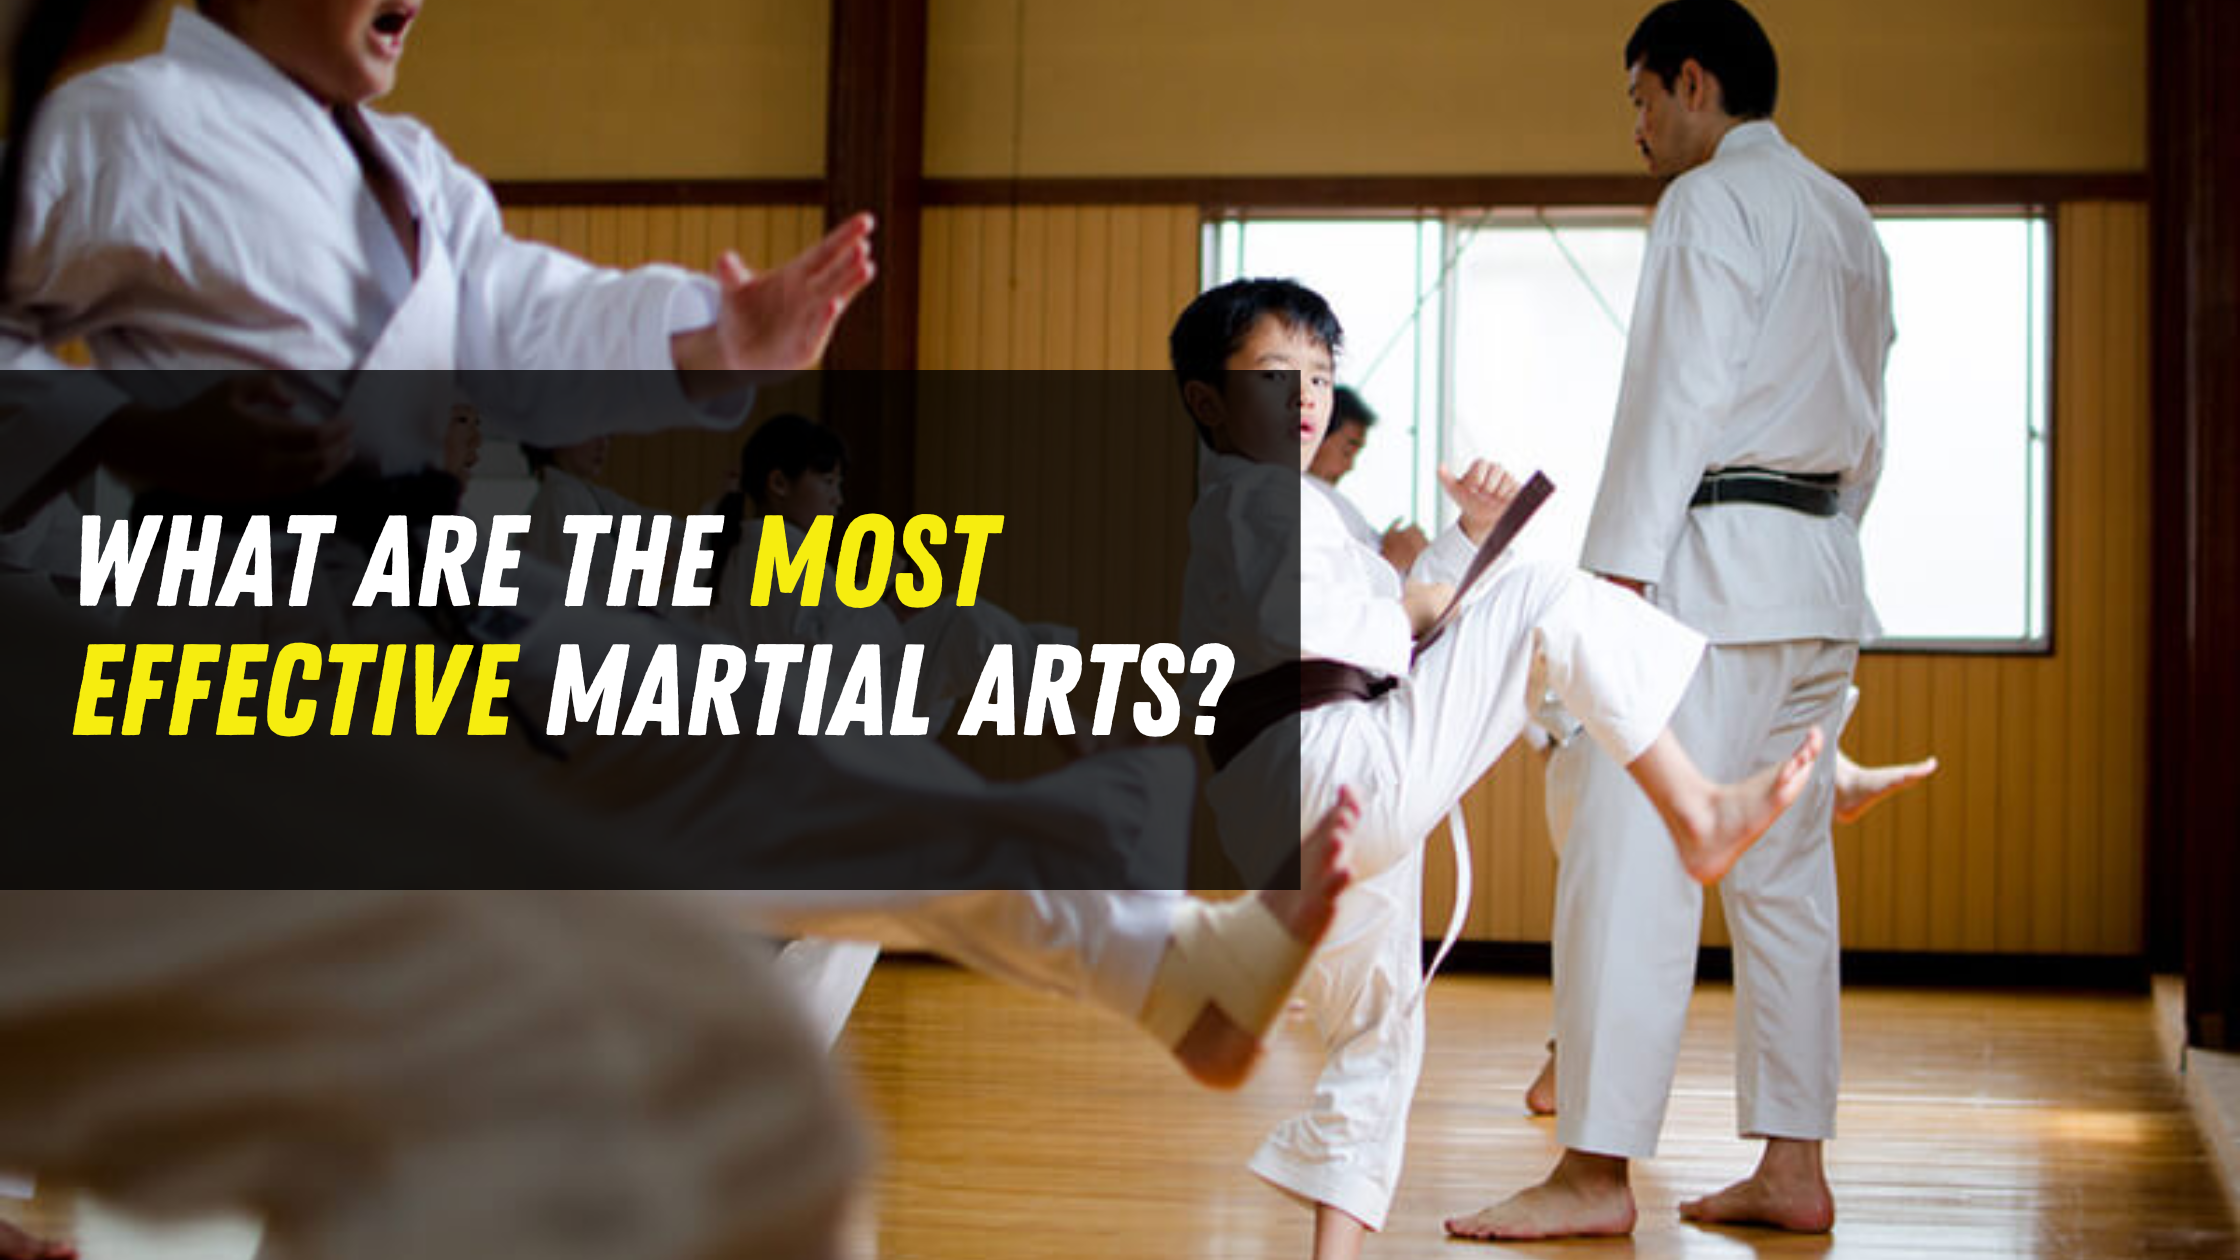 What Are the Most Effective Martial Arts?